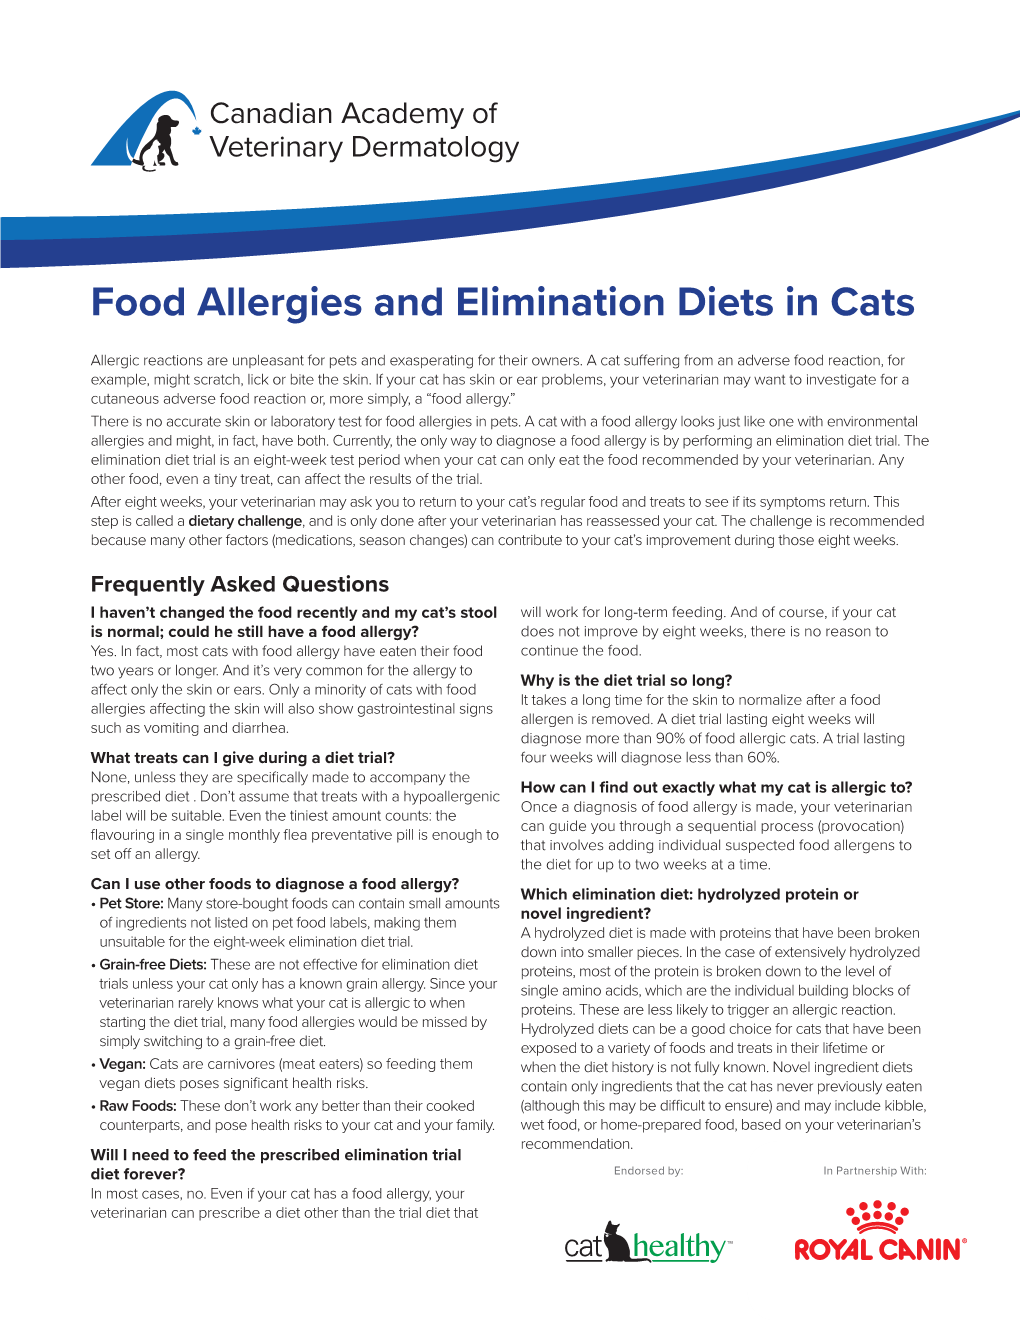 Food Allergies and Elimination Diets in Cats